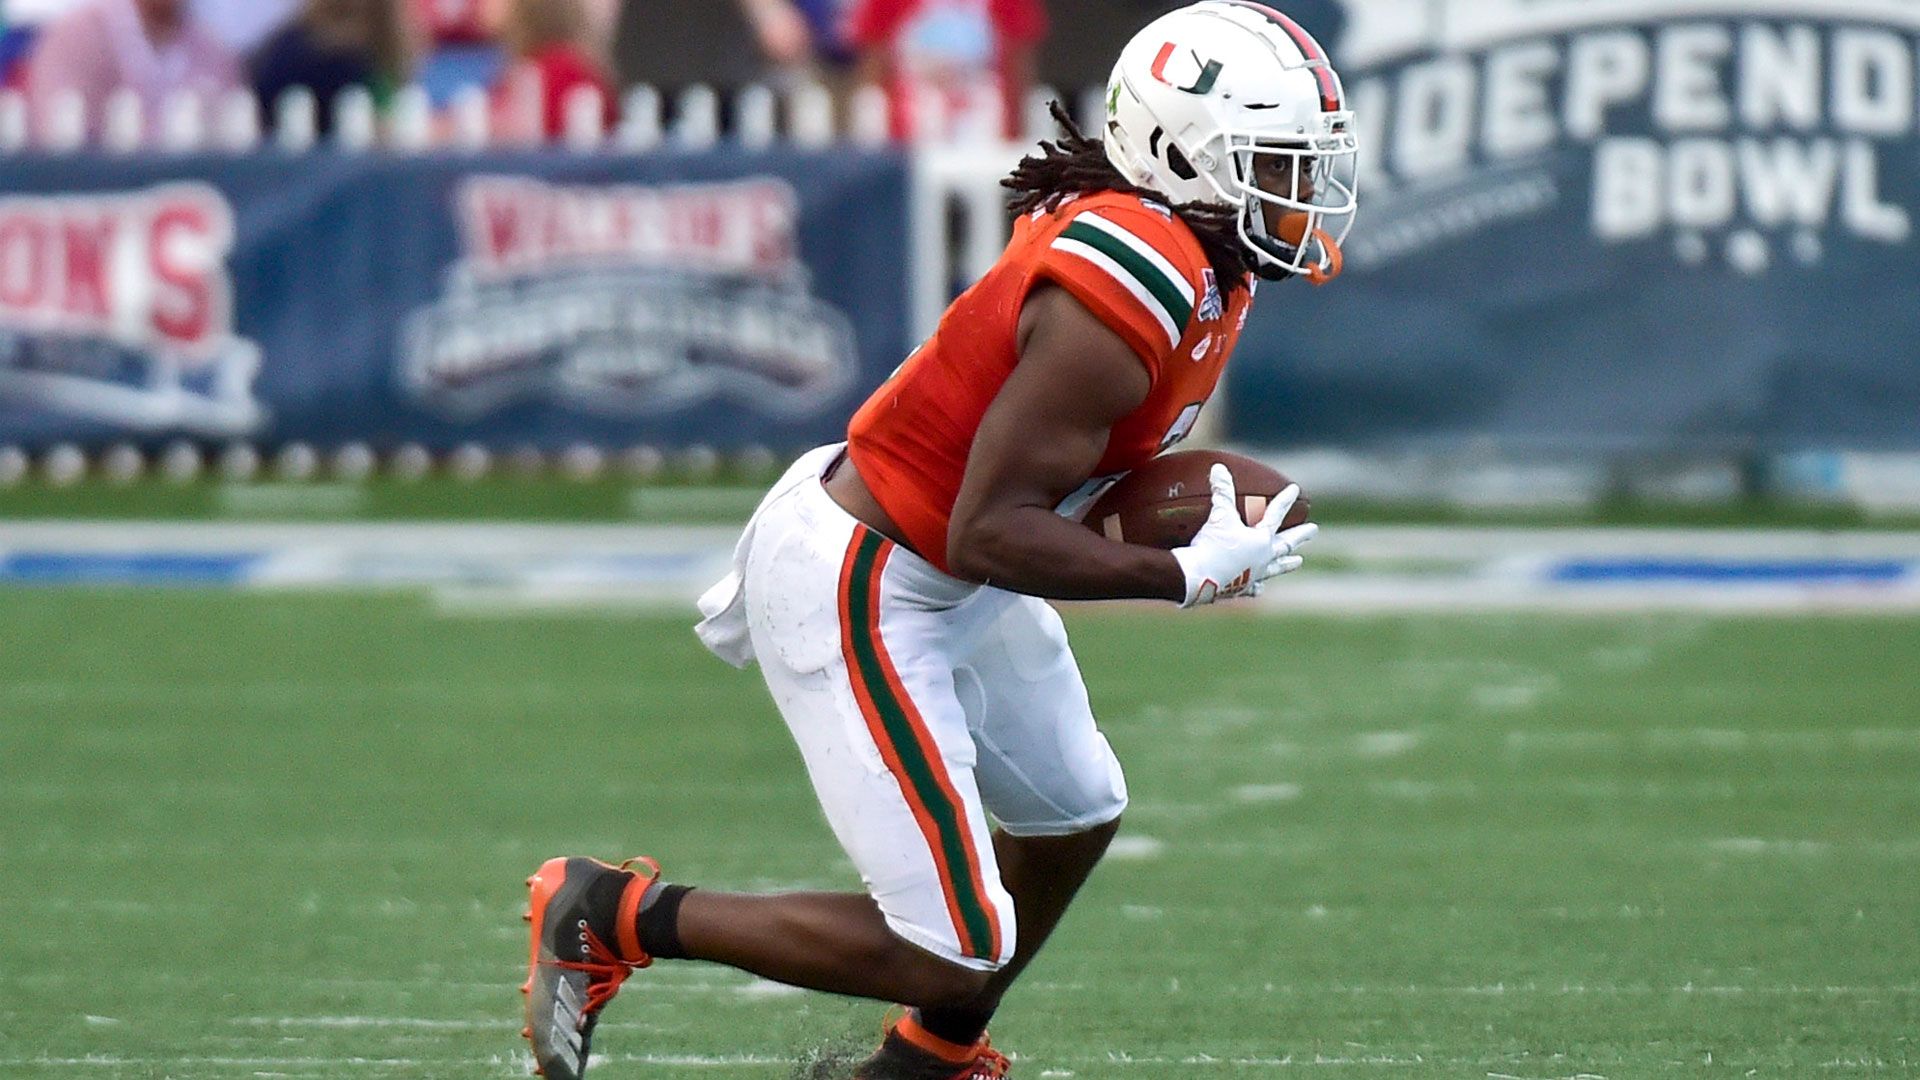 Canes Fall to Louisiana Tech in Independence Bowl